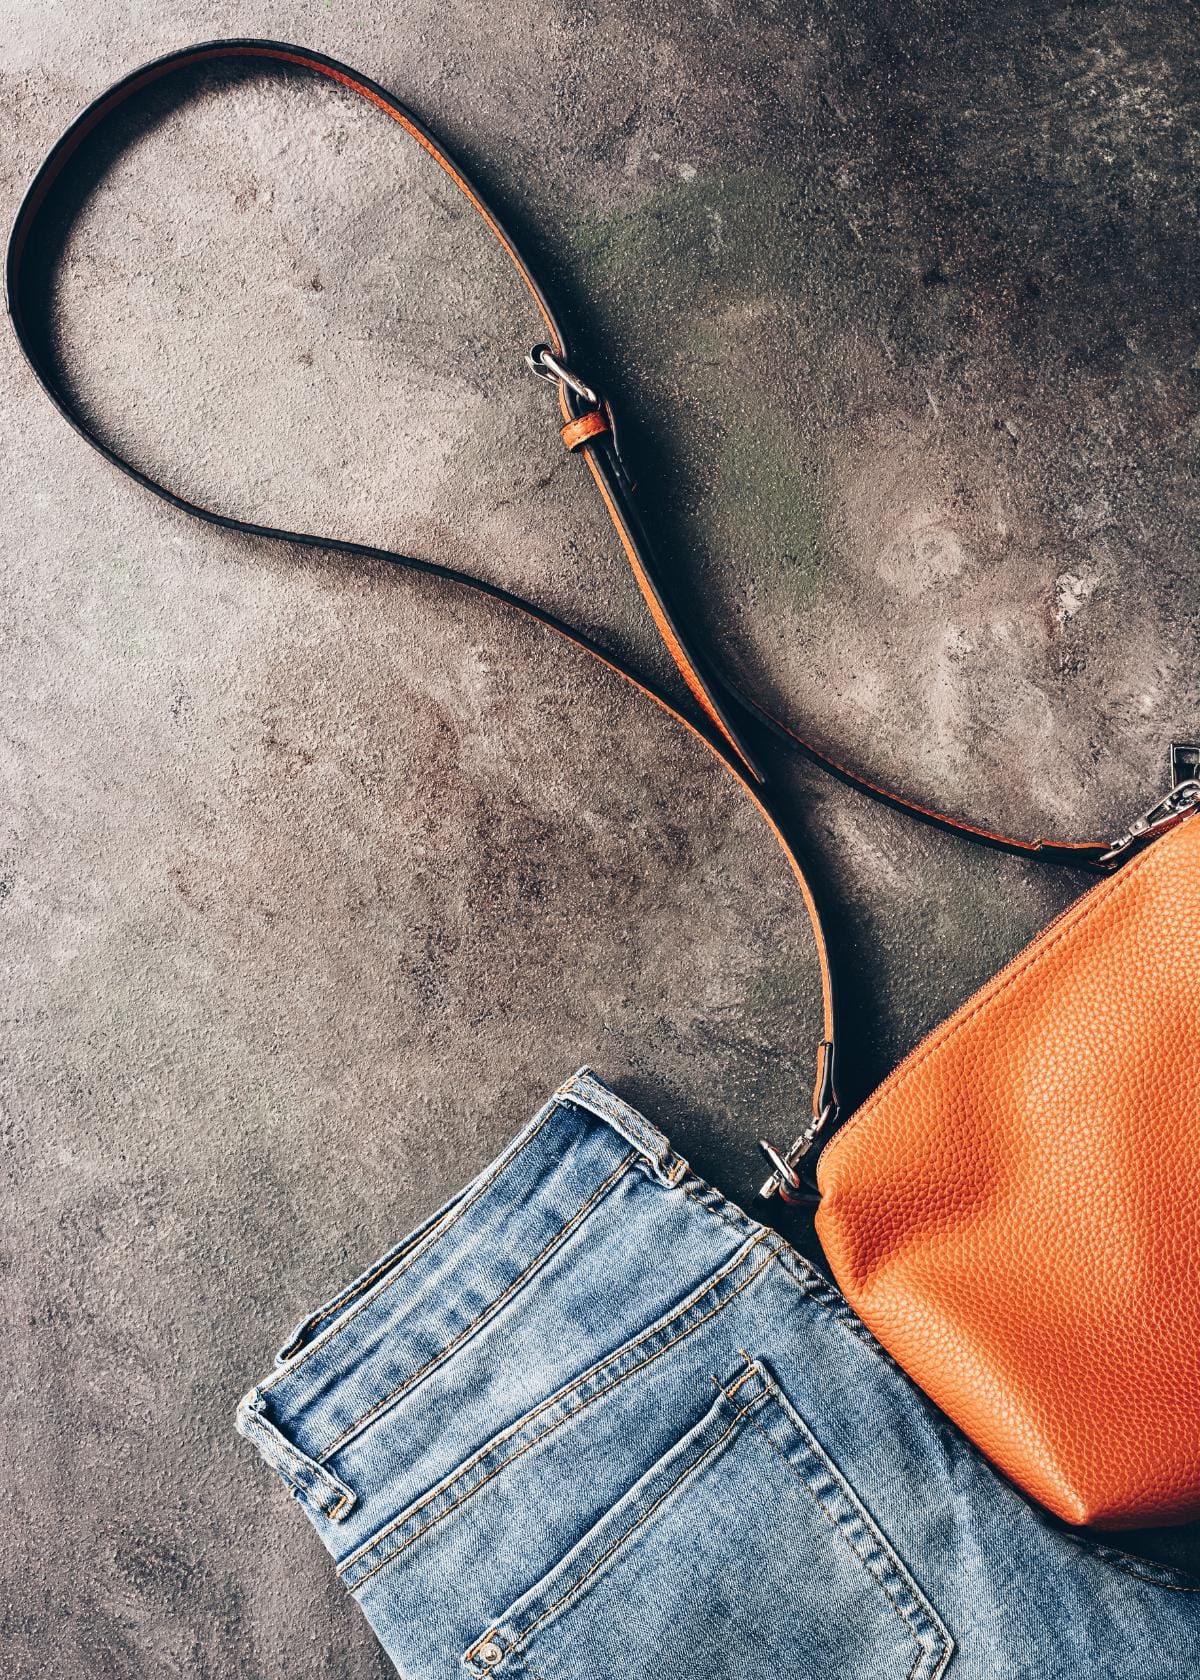 Best Cross-Body Bags for Travel in Europe